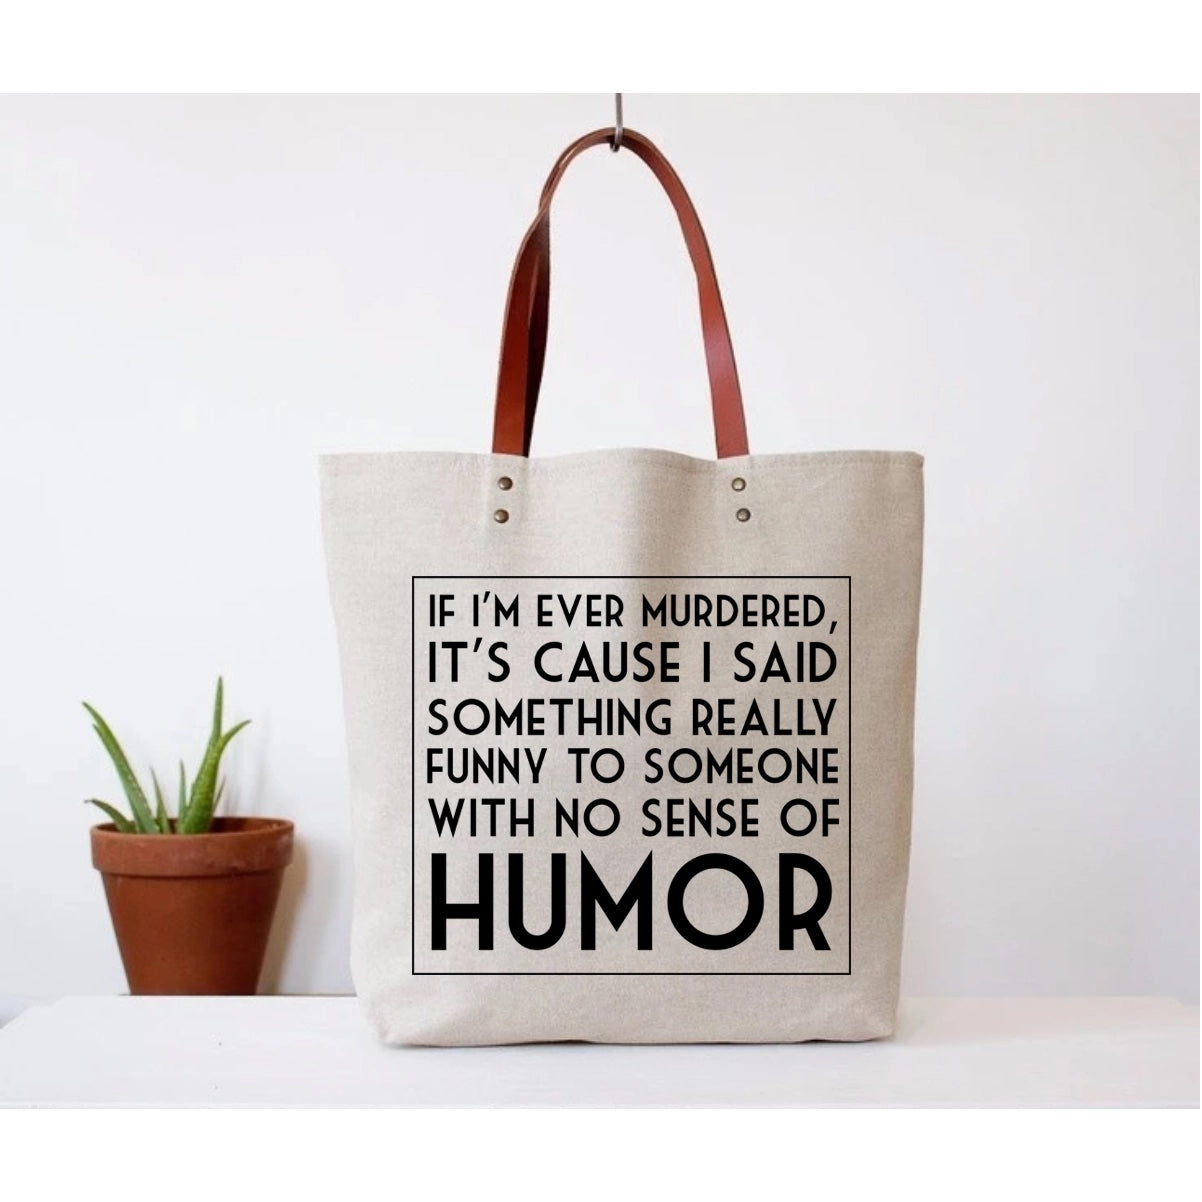 Canvas tote bag with faux leather straps that says "If I'm ever murdered t's cause I said something funny to someone with no sense of humor"